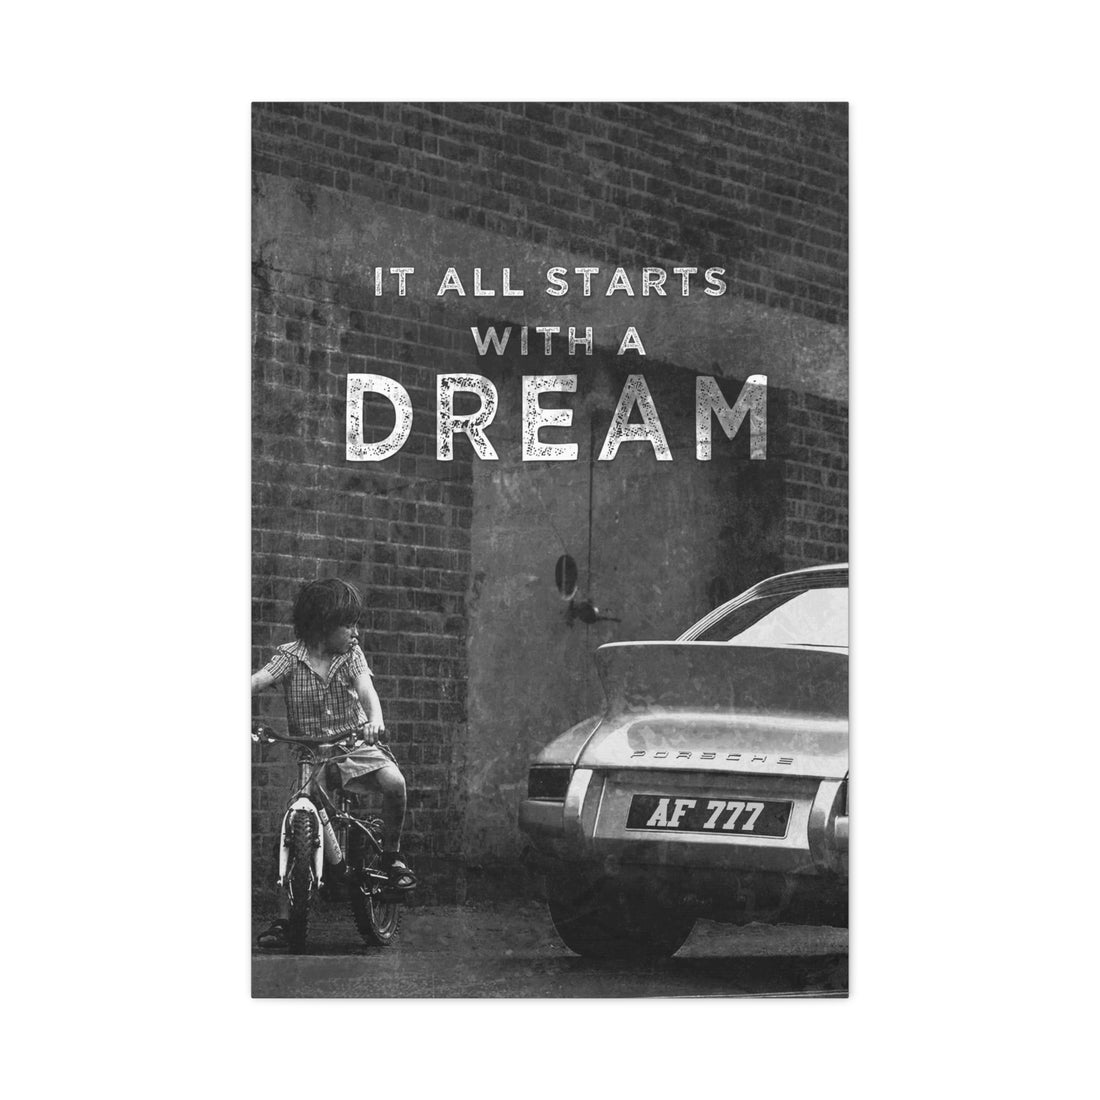 IT ALL STARTS WITH A DREAM